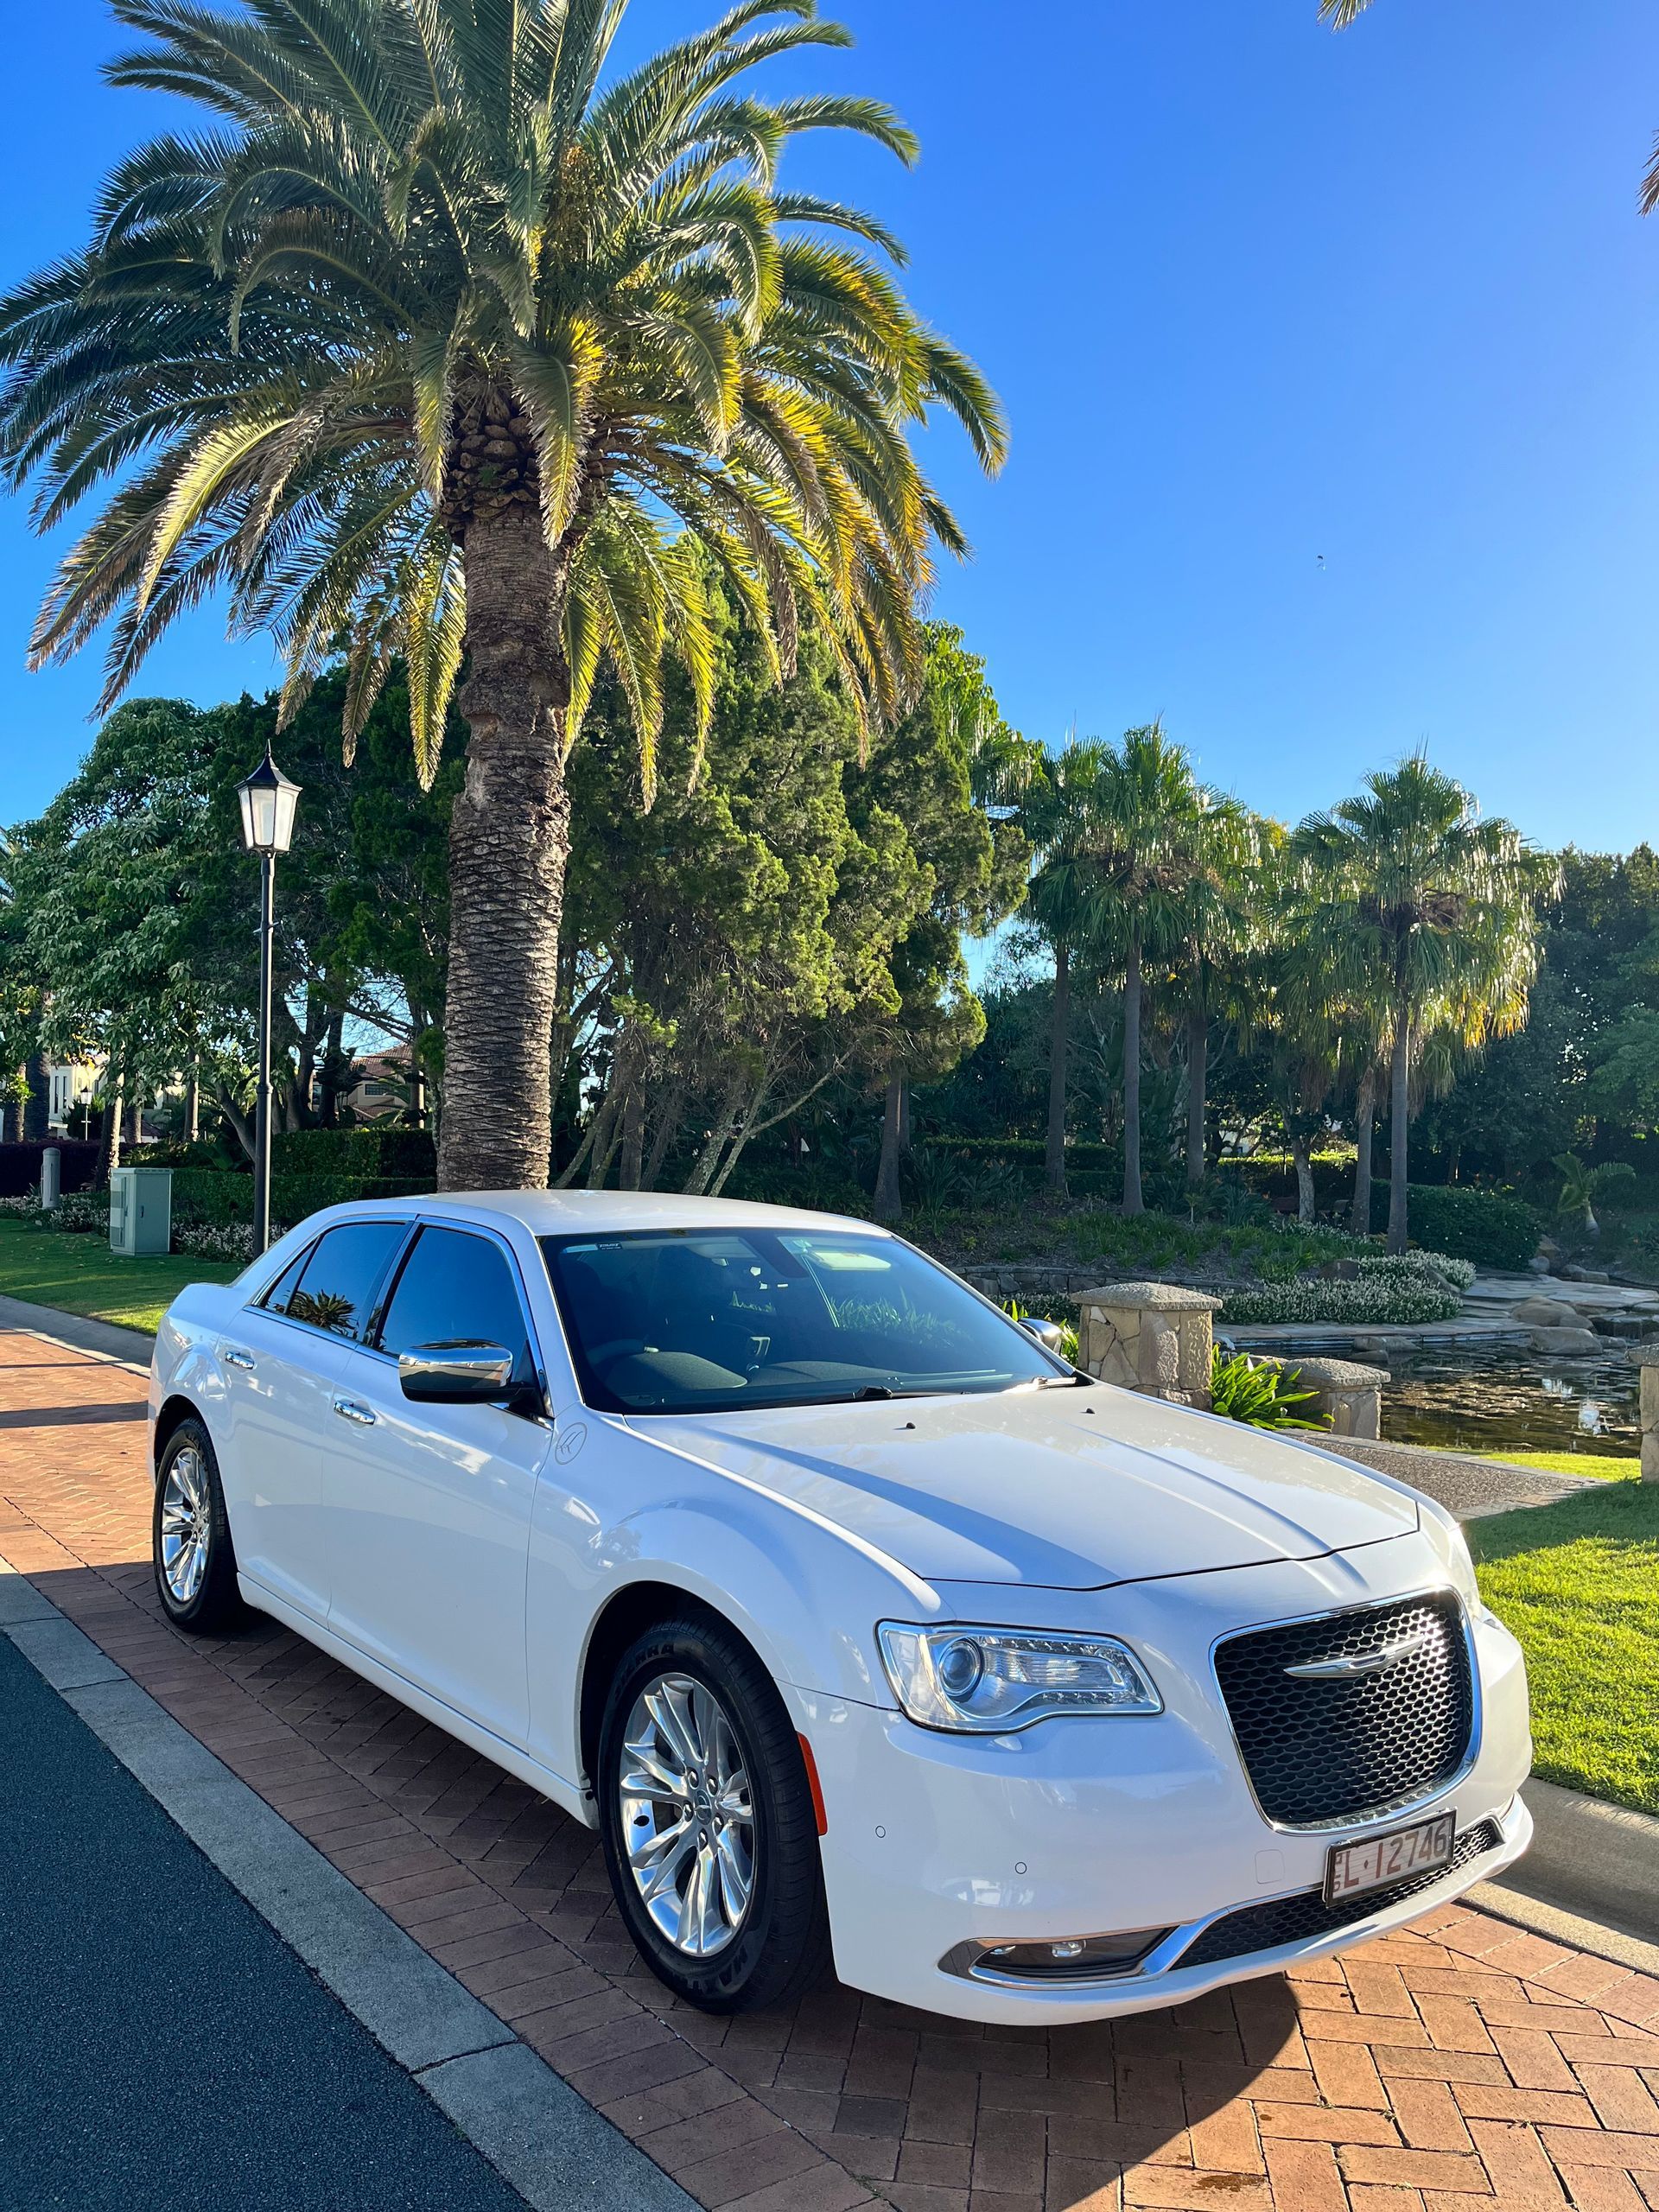 Limousine — Limo Hire in Gold Coast, QLD